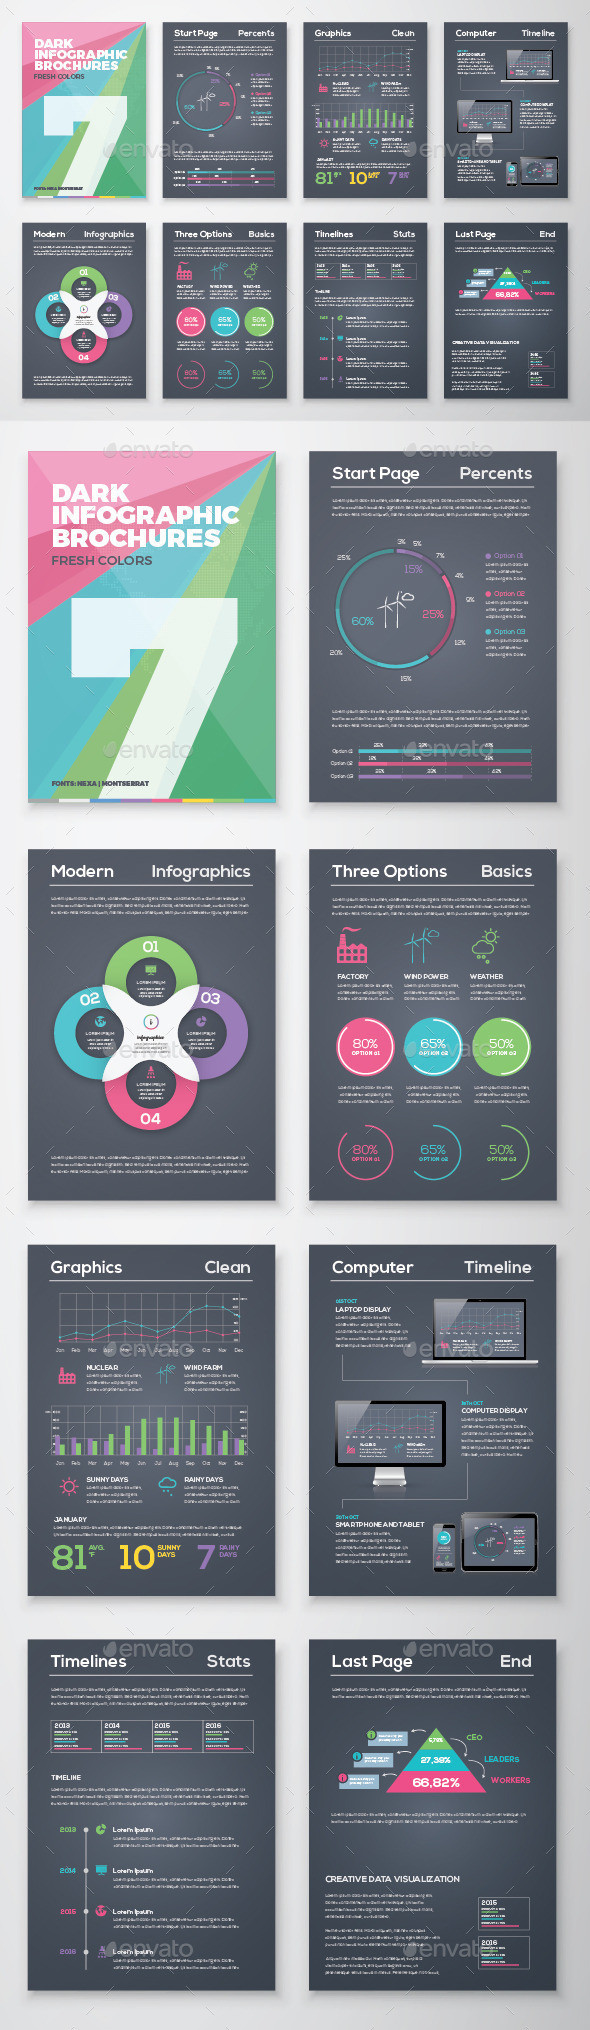 Infographic tools 7 boxed dark gr preview